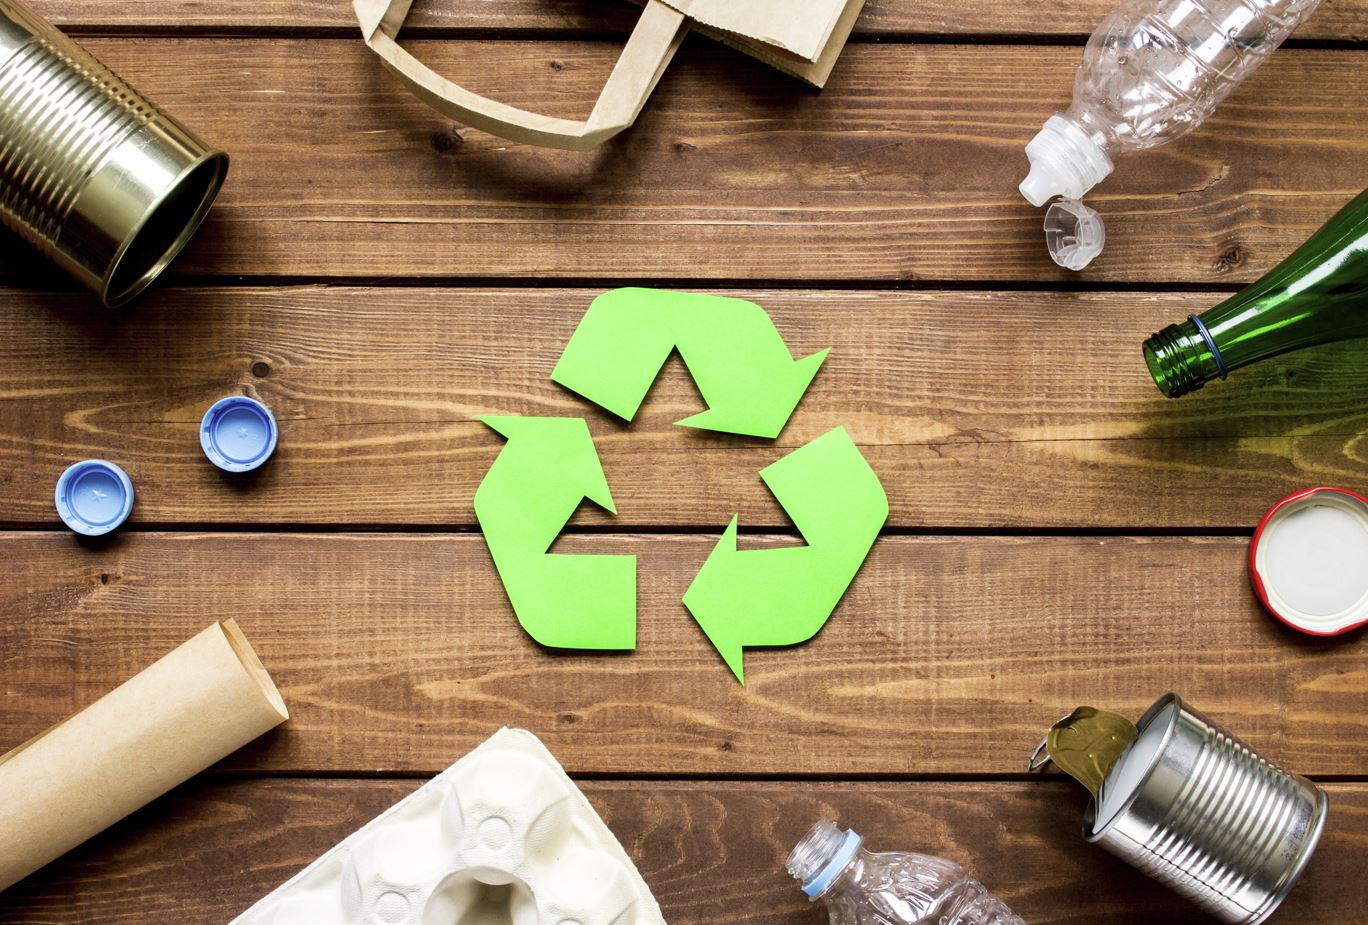 NexantECA’s Reports on Recycling and The Circular Economy